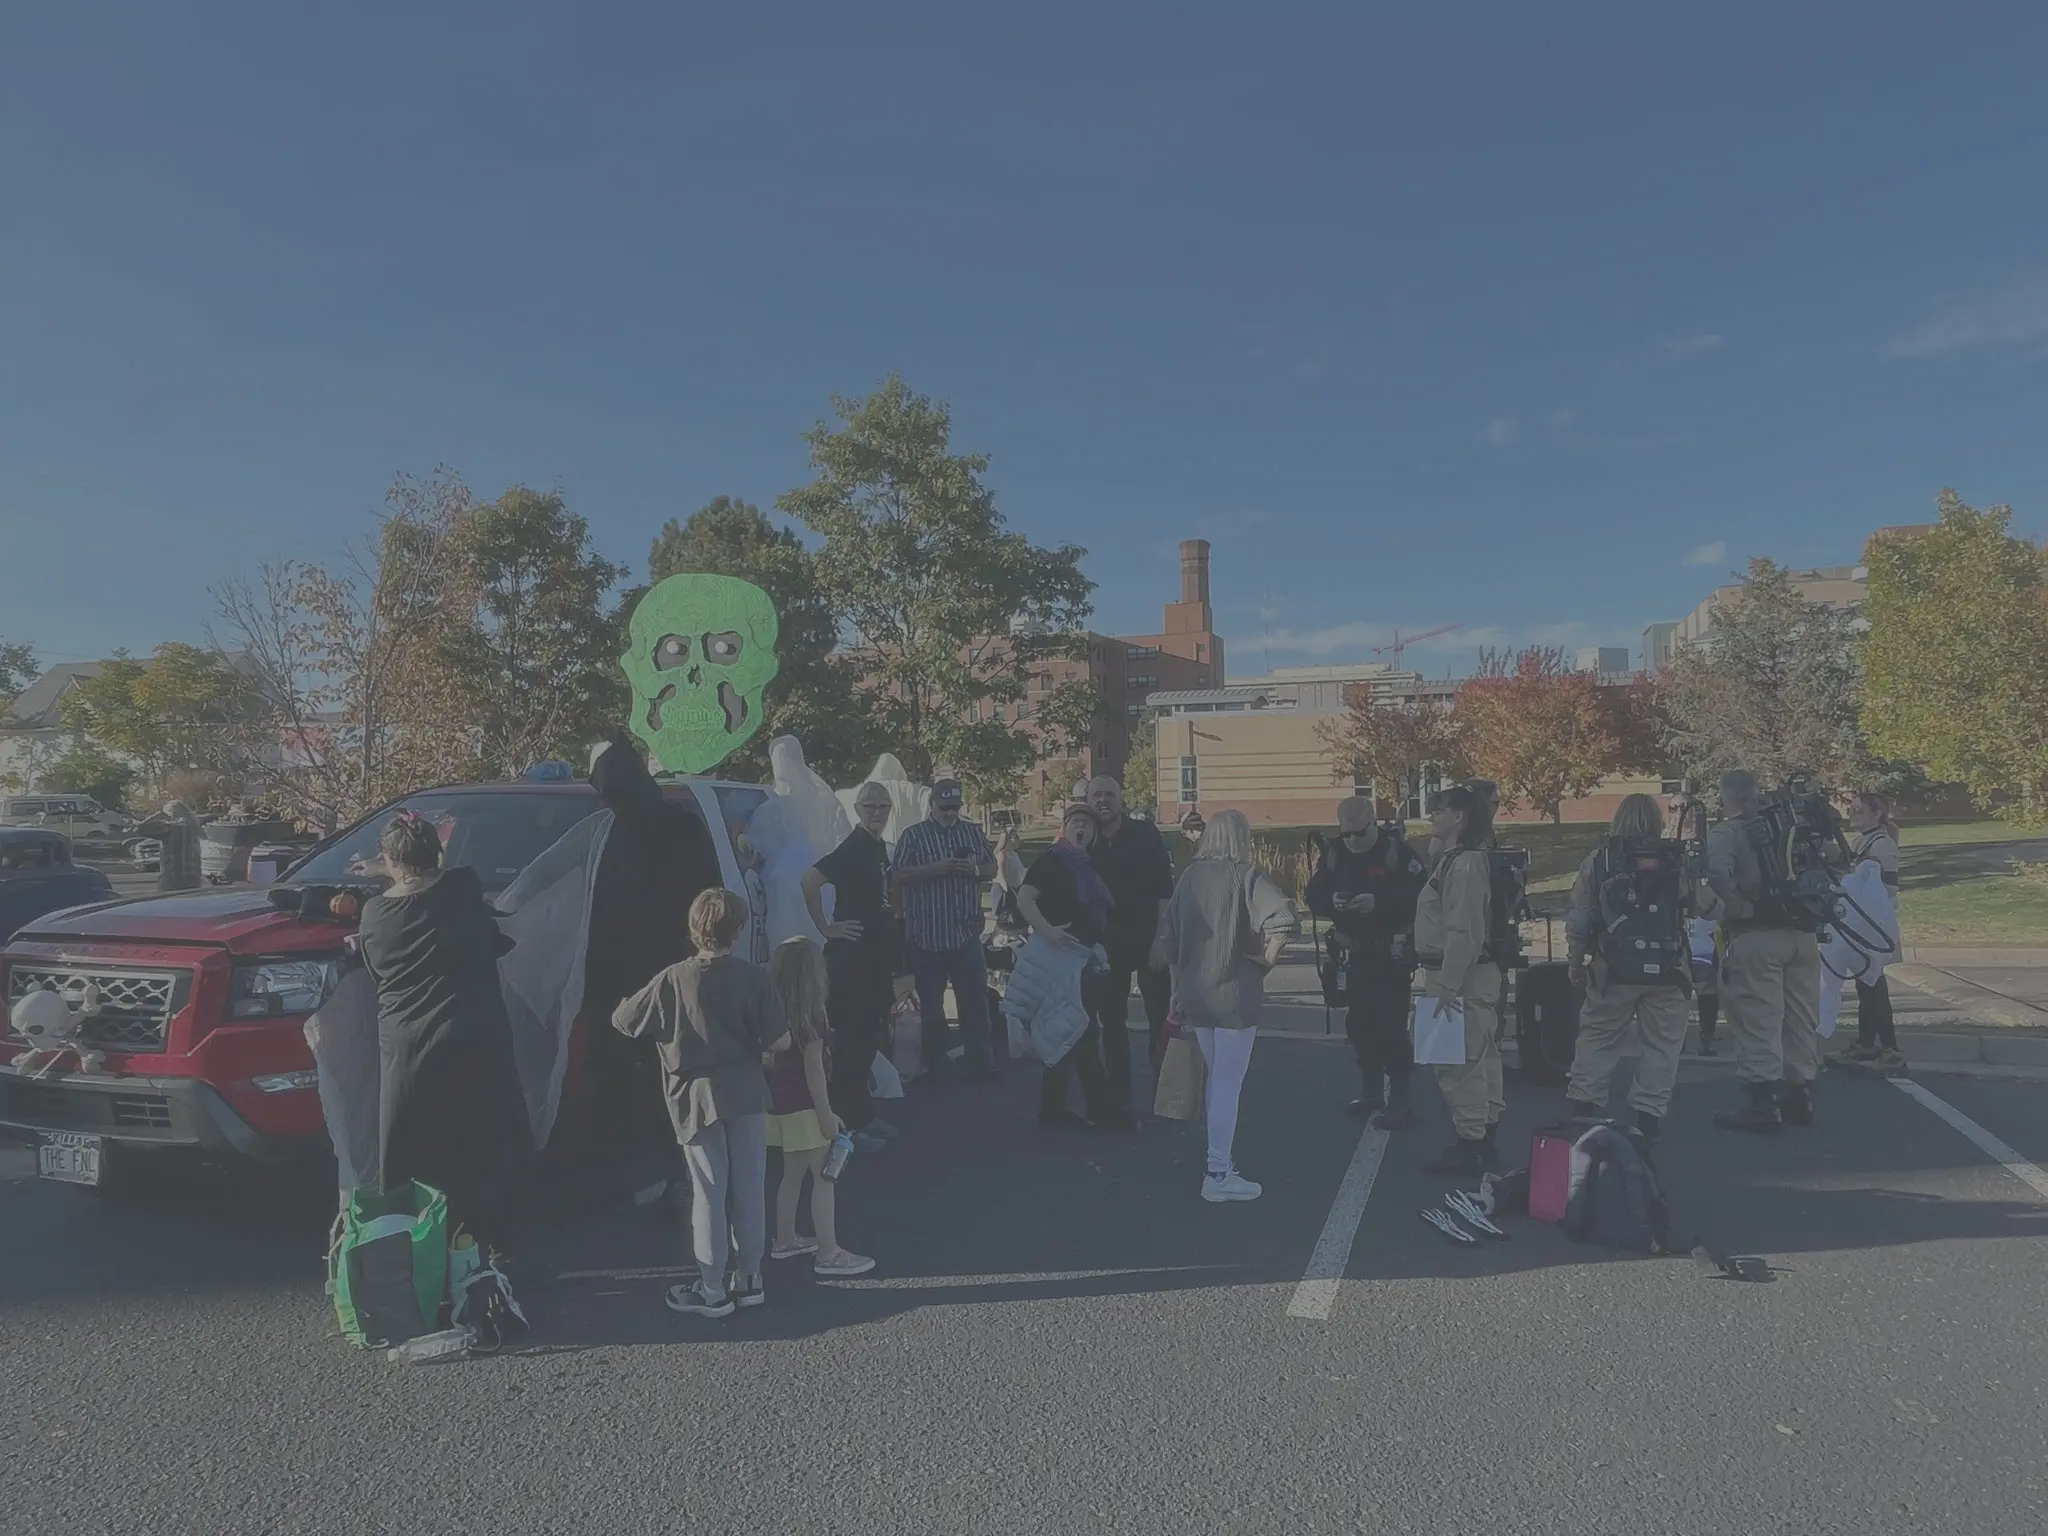 A group of people outside by a red truck loaded up with ghosts, people stand around facing the camera, others are Colorado Ghostbusters in proton packs getting ready to walk in a halloween parade